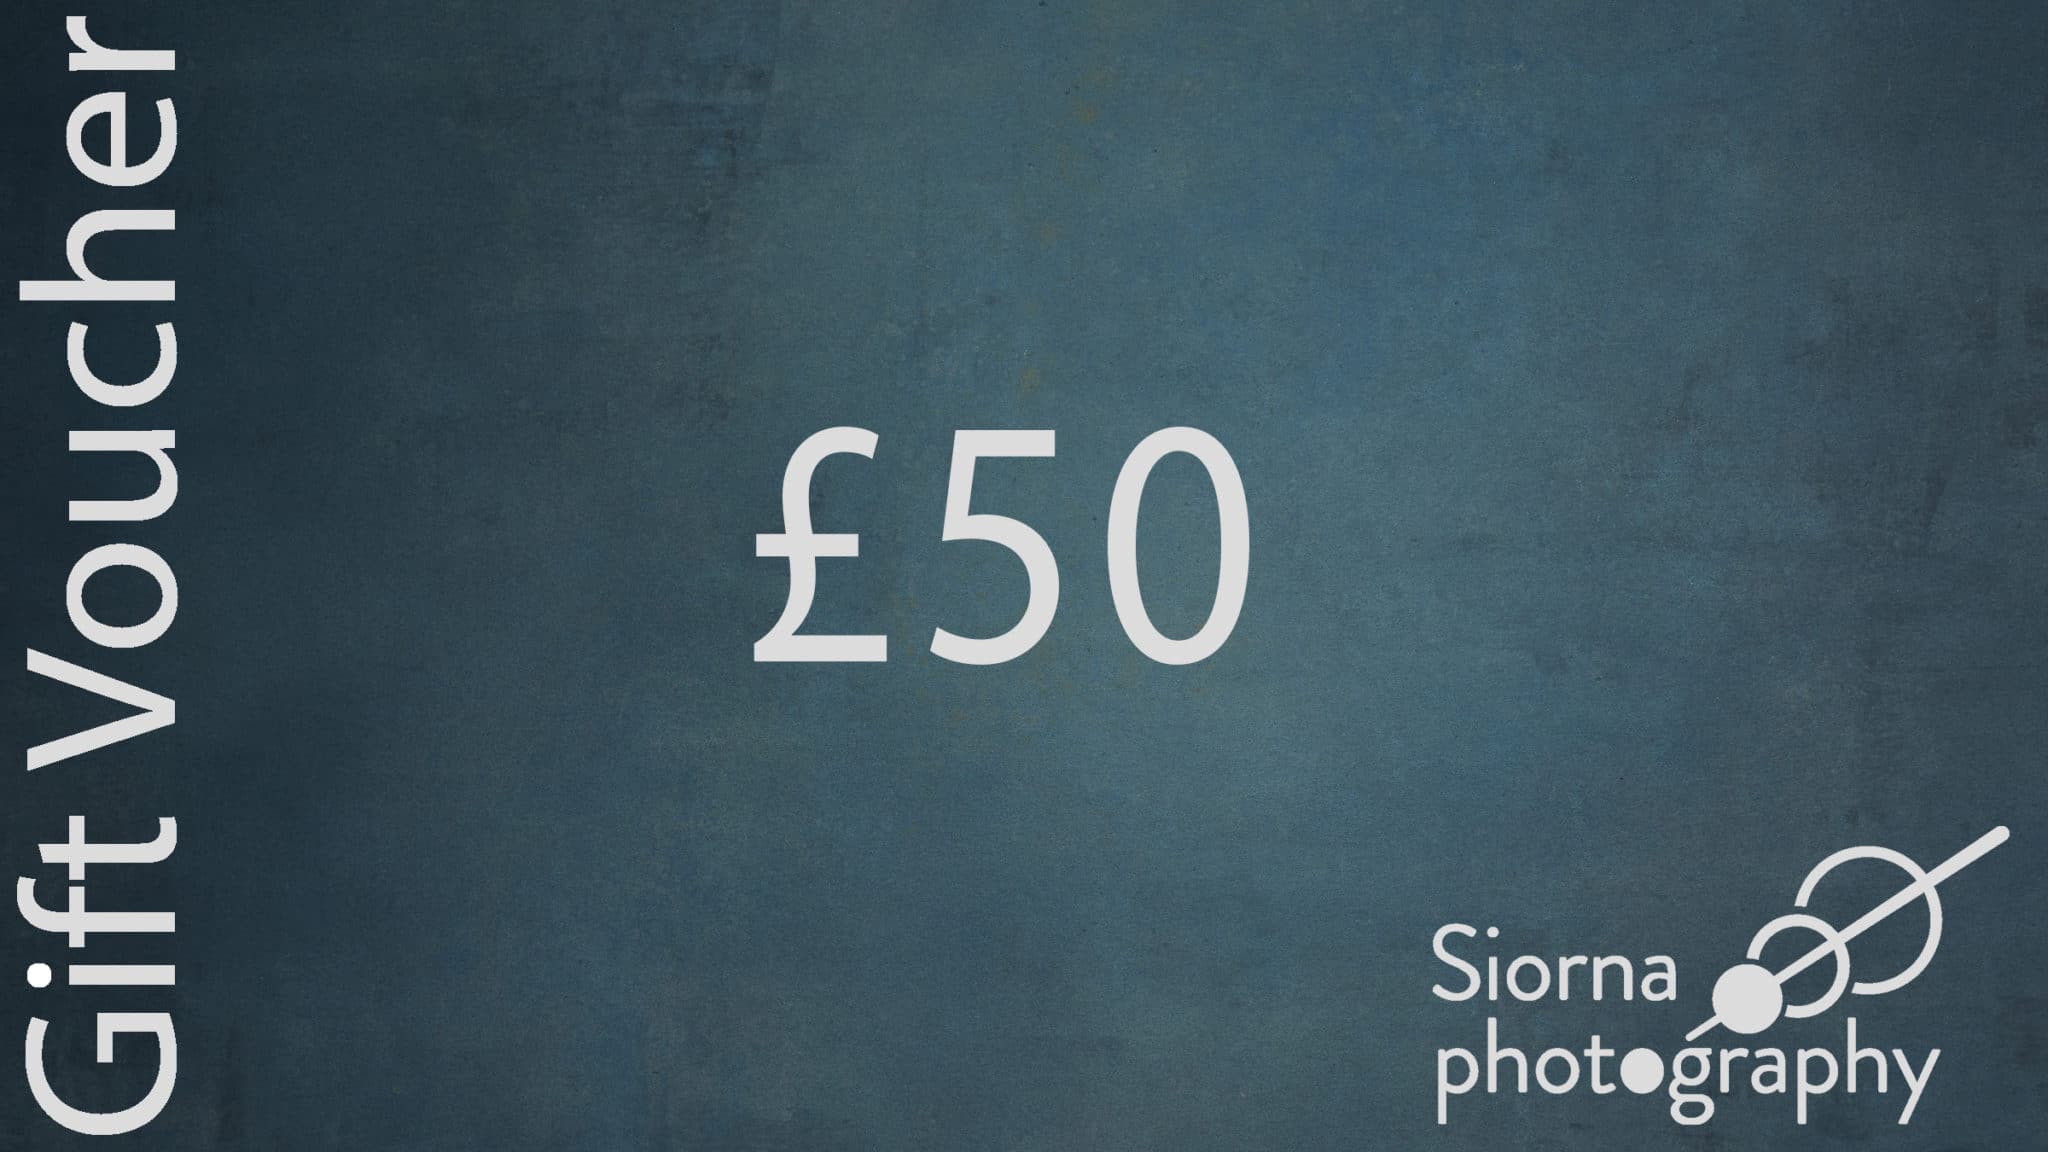 A London studio photography experience gift voucher for portraits and headshots.